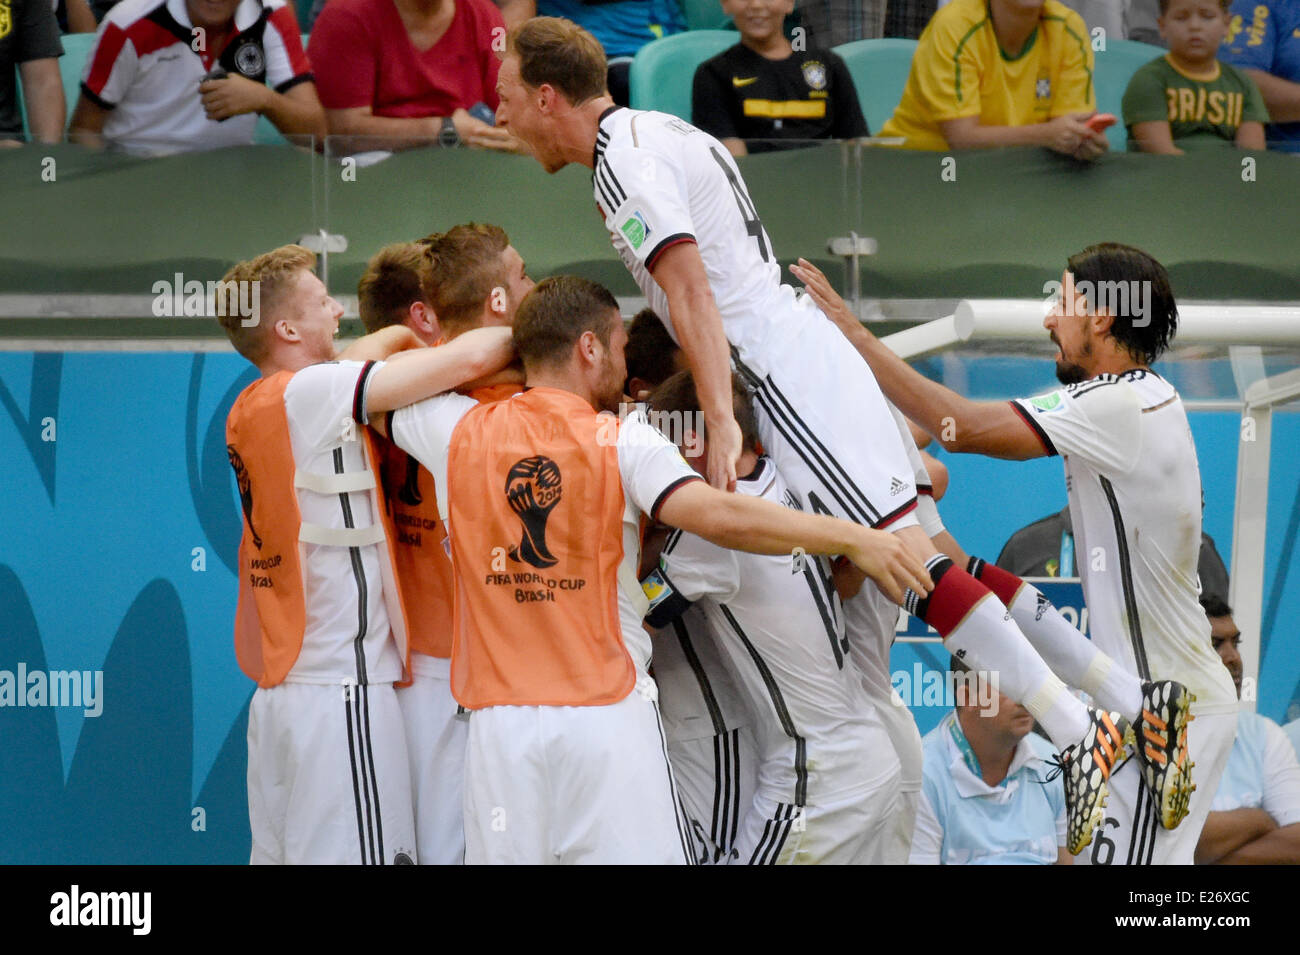 Salvador da Bahia, Brazil. 16th June, 2014. Salvador da Bahia, Brazil.  16th June, 2014. Germany's substitute players celebrate with Benedikt Höwedes (up) and Sami Khedira (R) afteroeMats Hummels (not seen) scored the 2-0 during to the FIFA World Cup 2014 group G preliminary round match between Germany and Portugal at the Arena Fonte Nova Stadium in Salvador da Bahia, Brazil, 16 June 2014. Photo: Marcus Brandt/dpa/Alamy Live News Credit:  dpa picture alliance/Alamy Live News Stock Photo